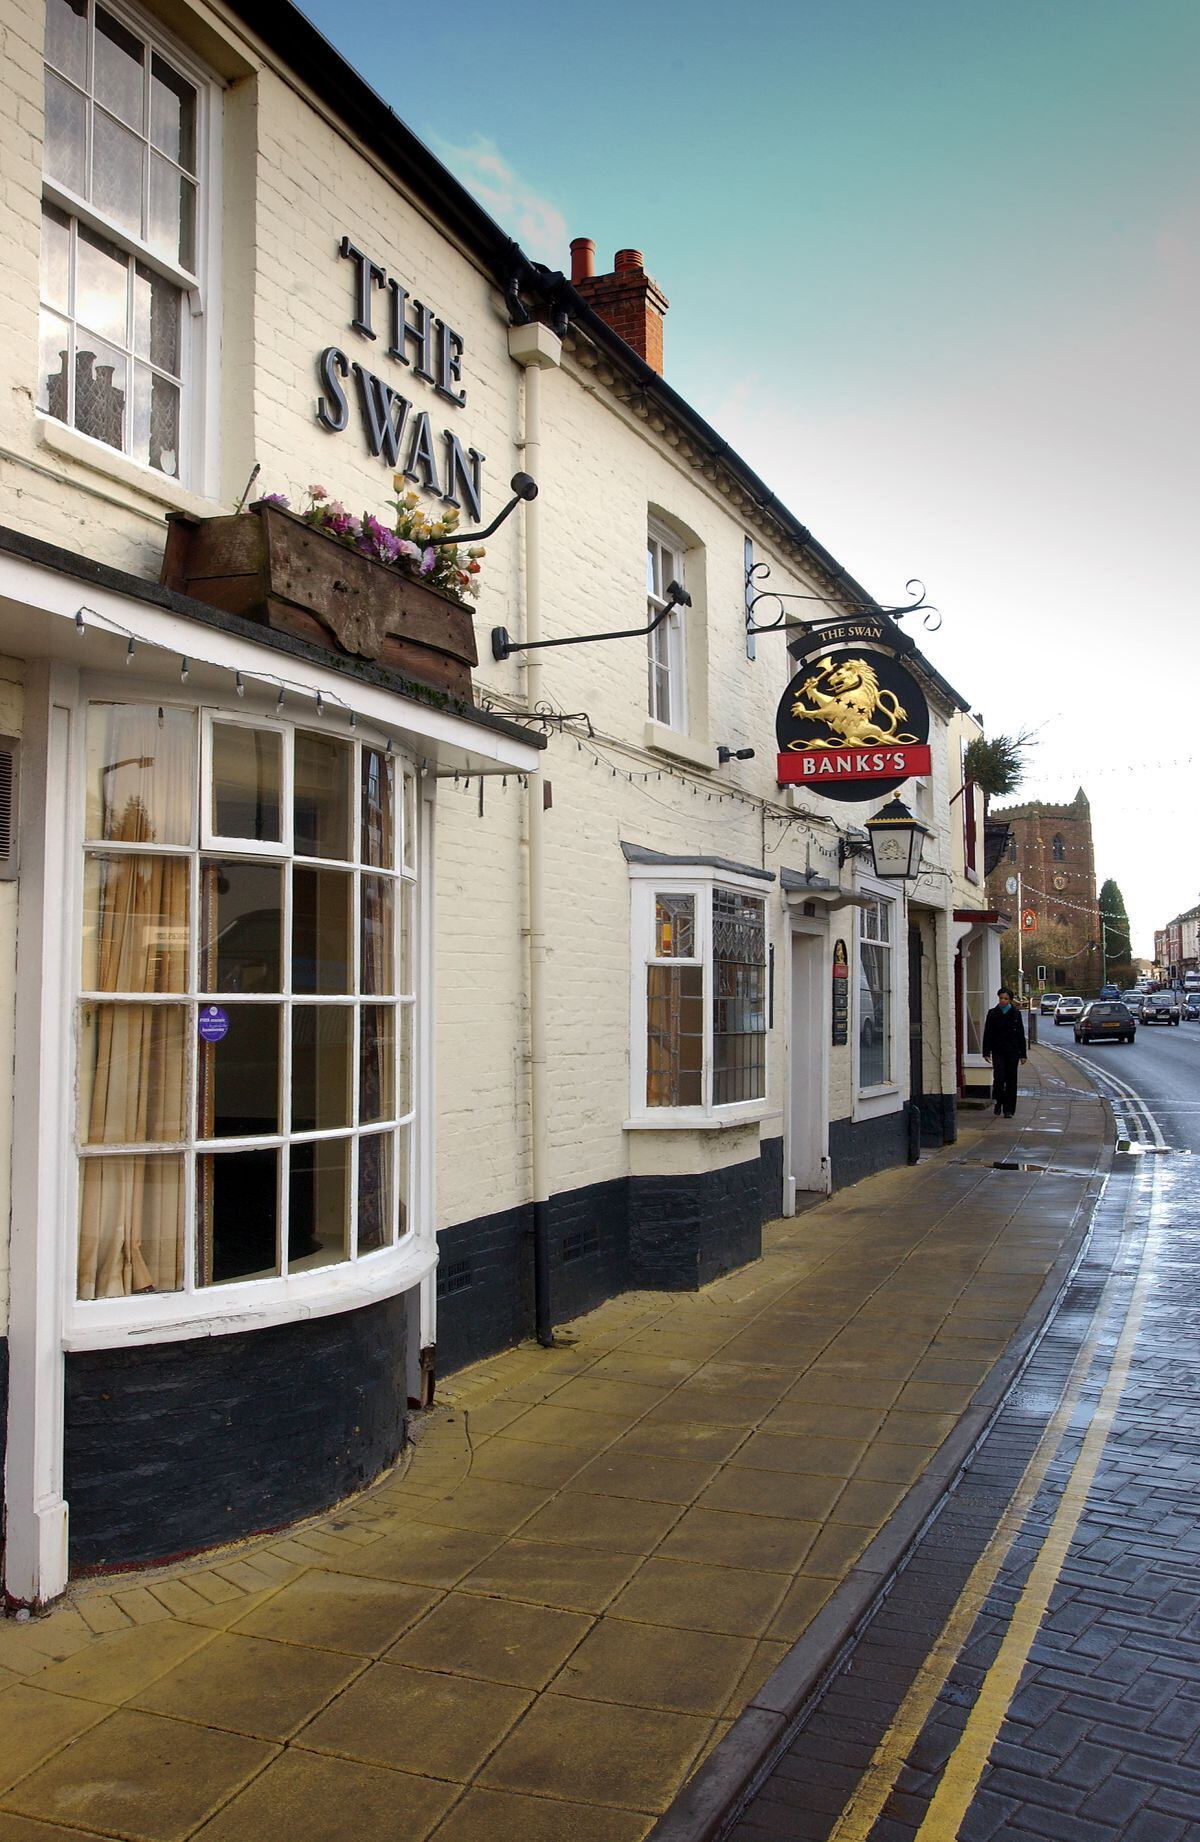 Robert Hendy-Freegard was working as a barman at The Swan in Newport when he began his con